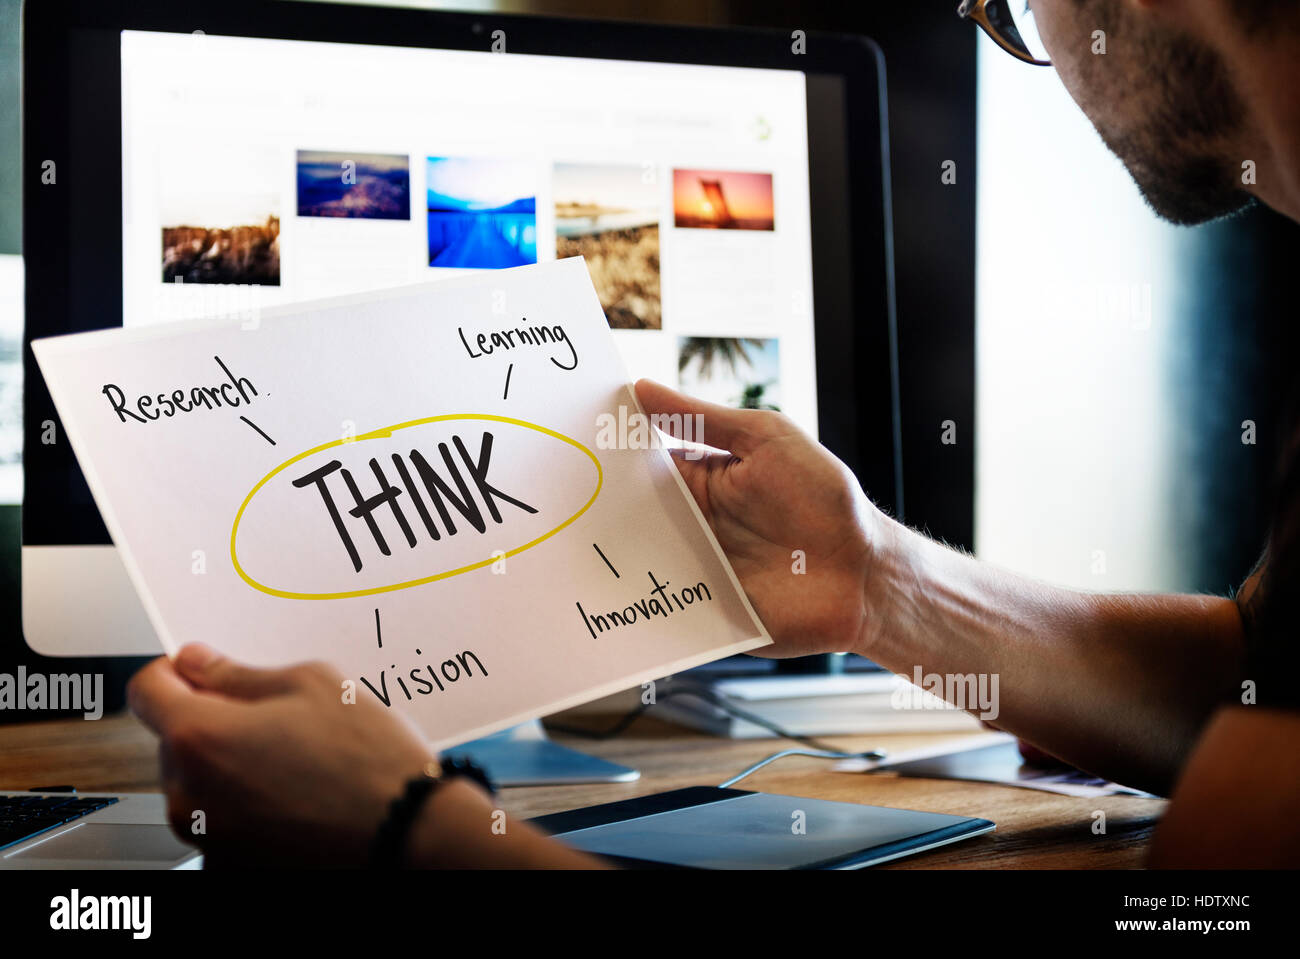 Think Education Inspire Learn Diagram Concept Stock Photo